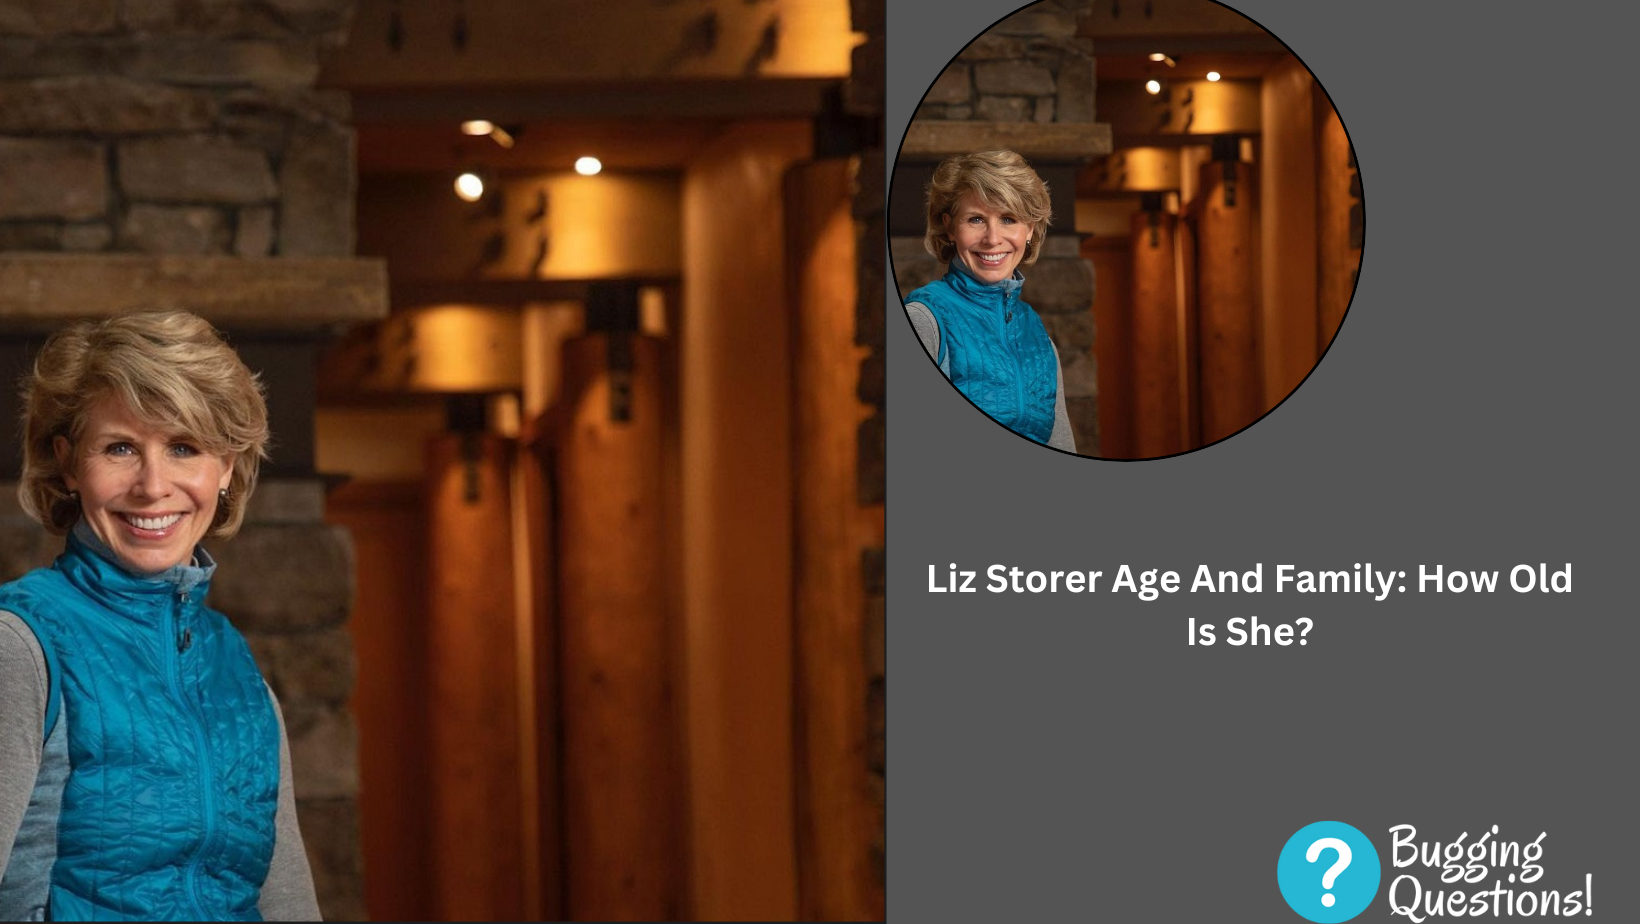 Liz Storer Age And Family: How Old Is She?